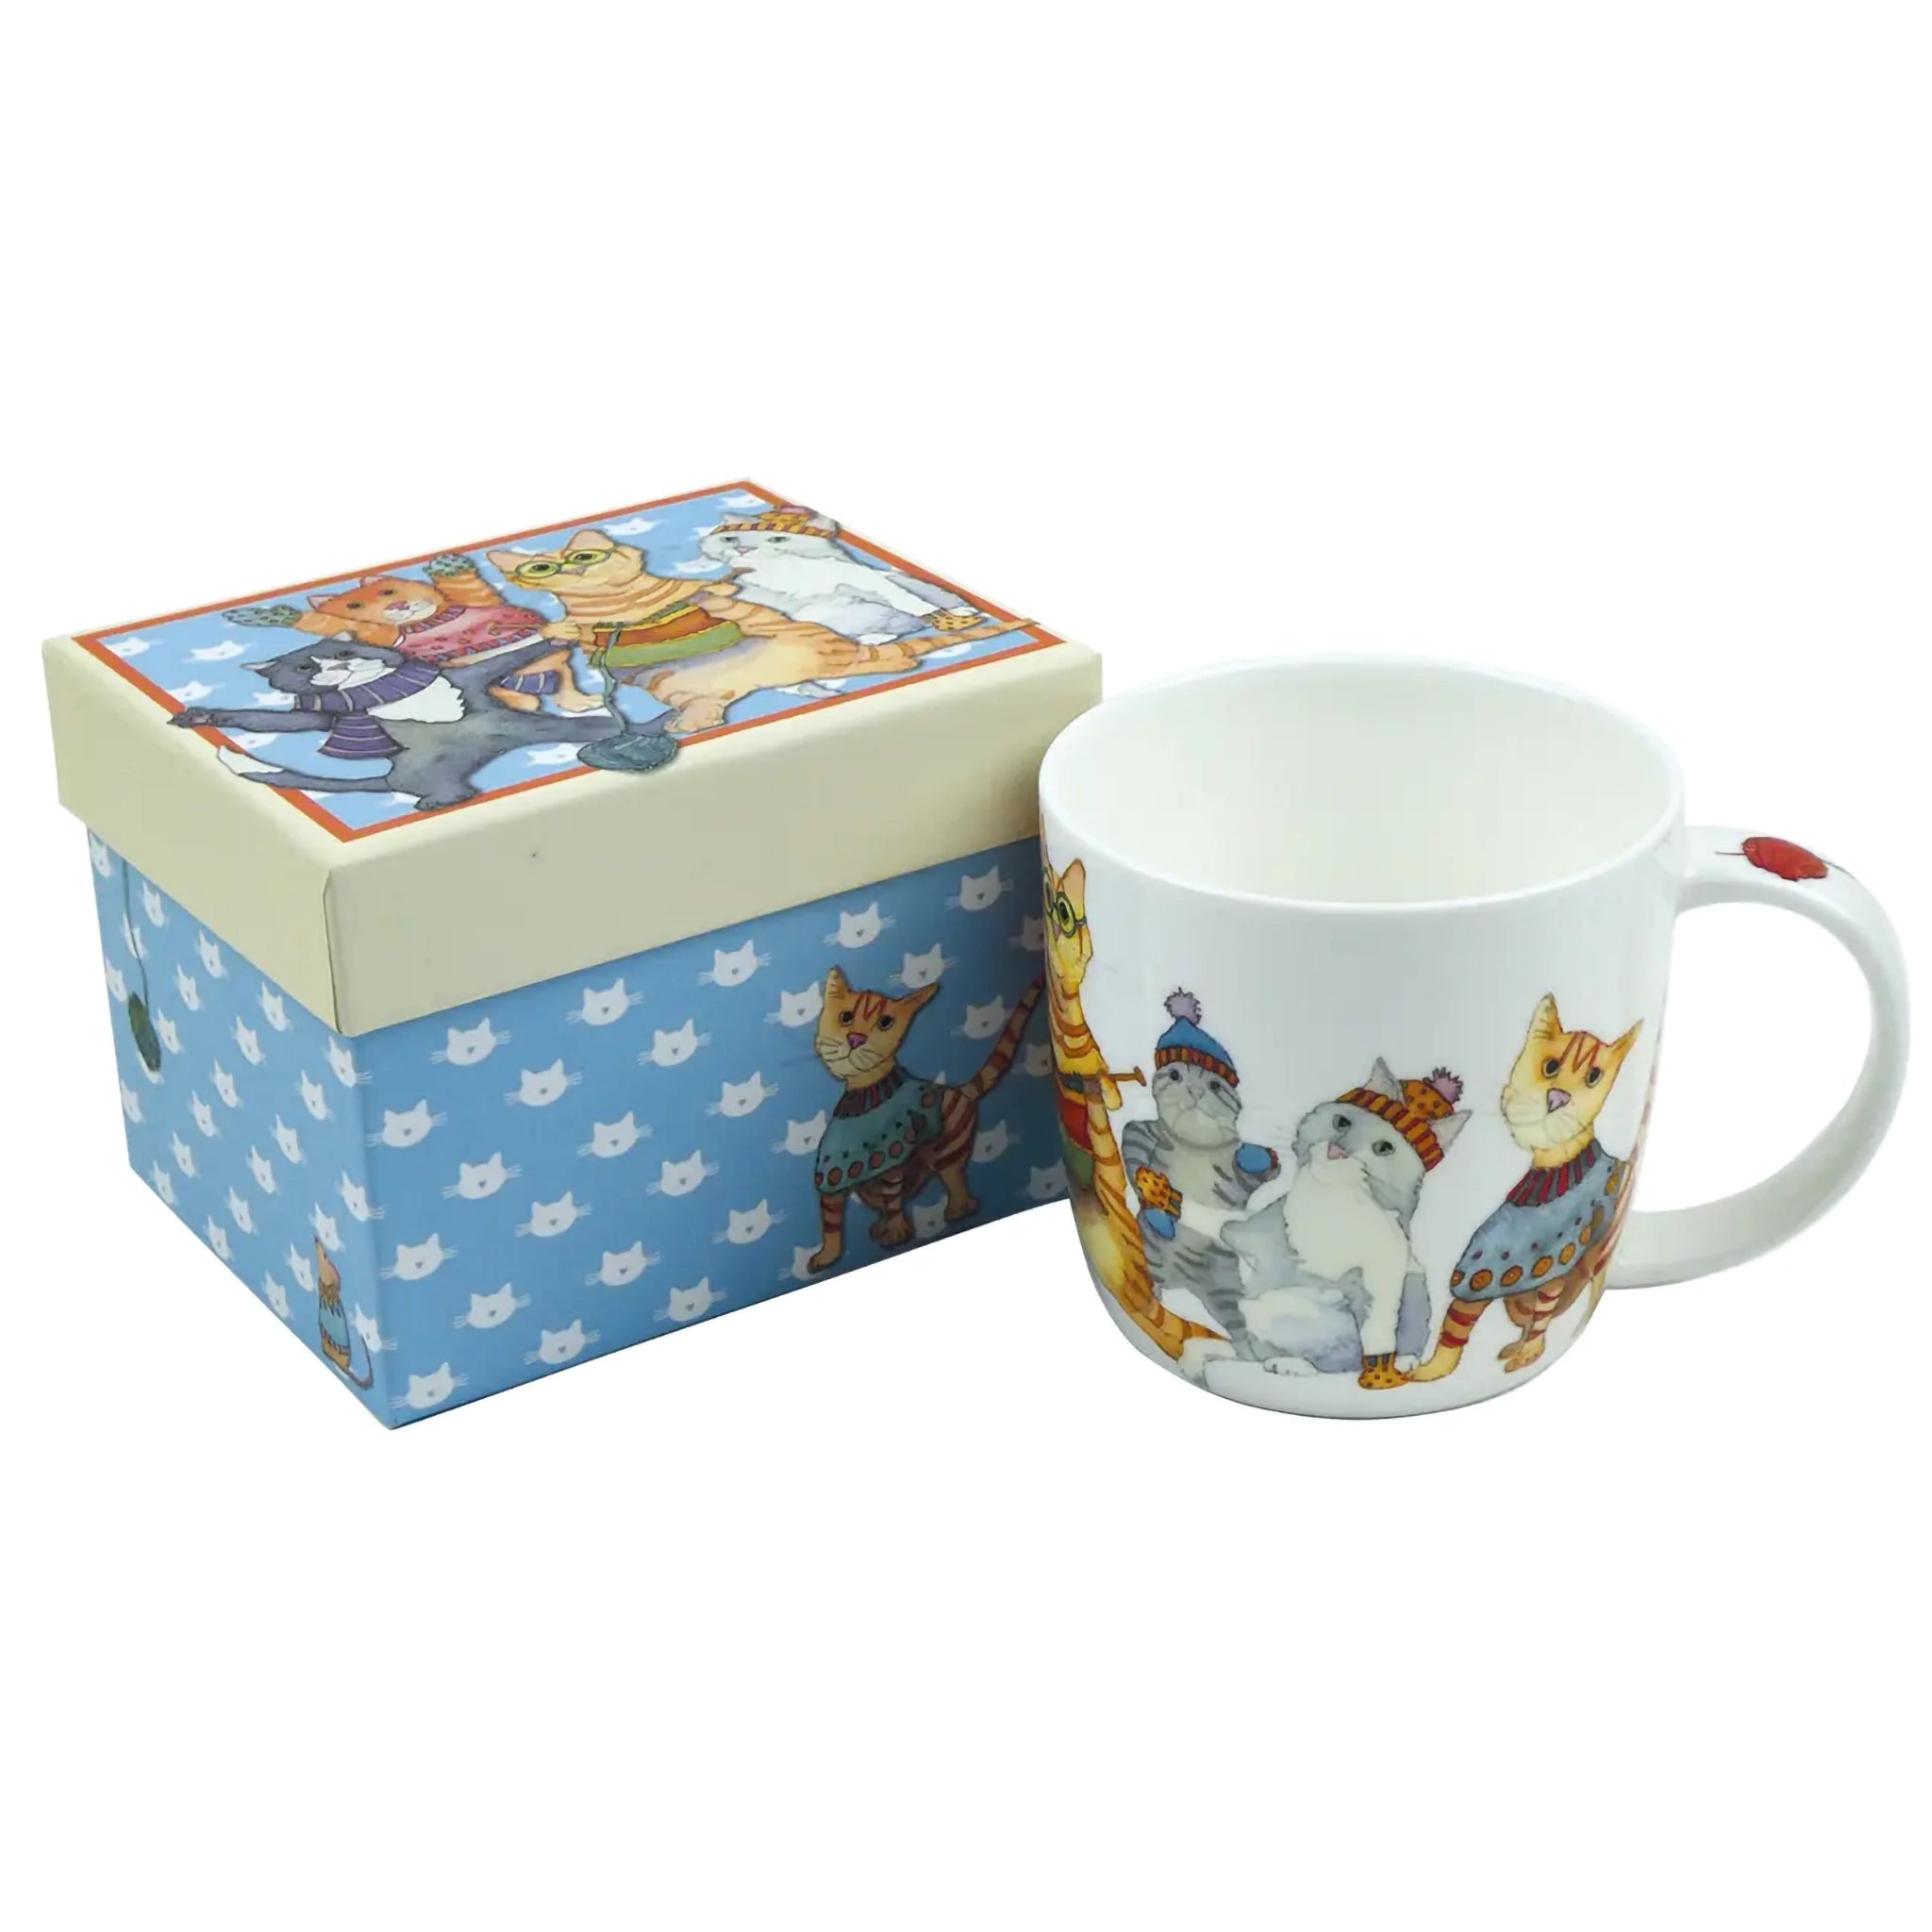 A white mug with an illustration of cats in winter clothing next to a matching gift box